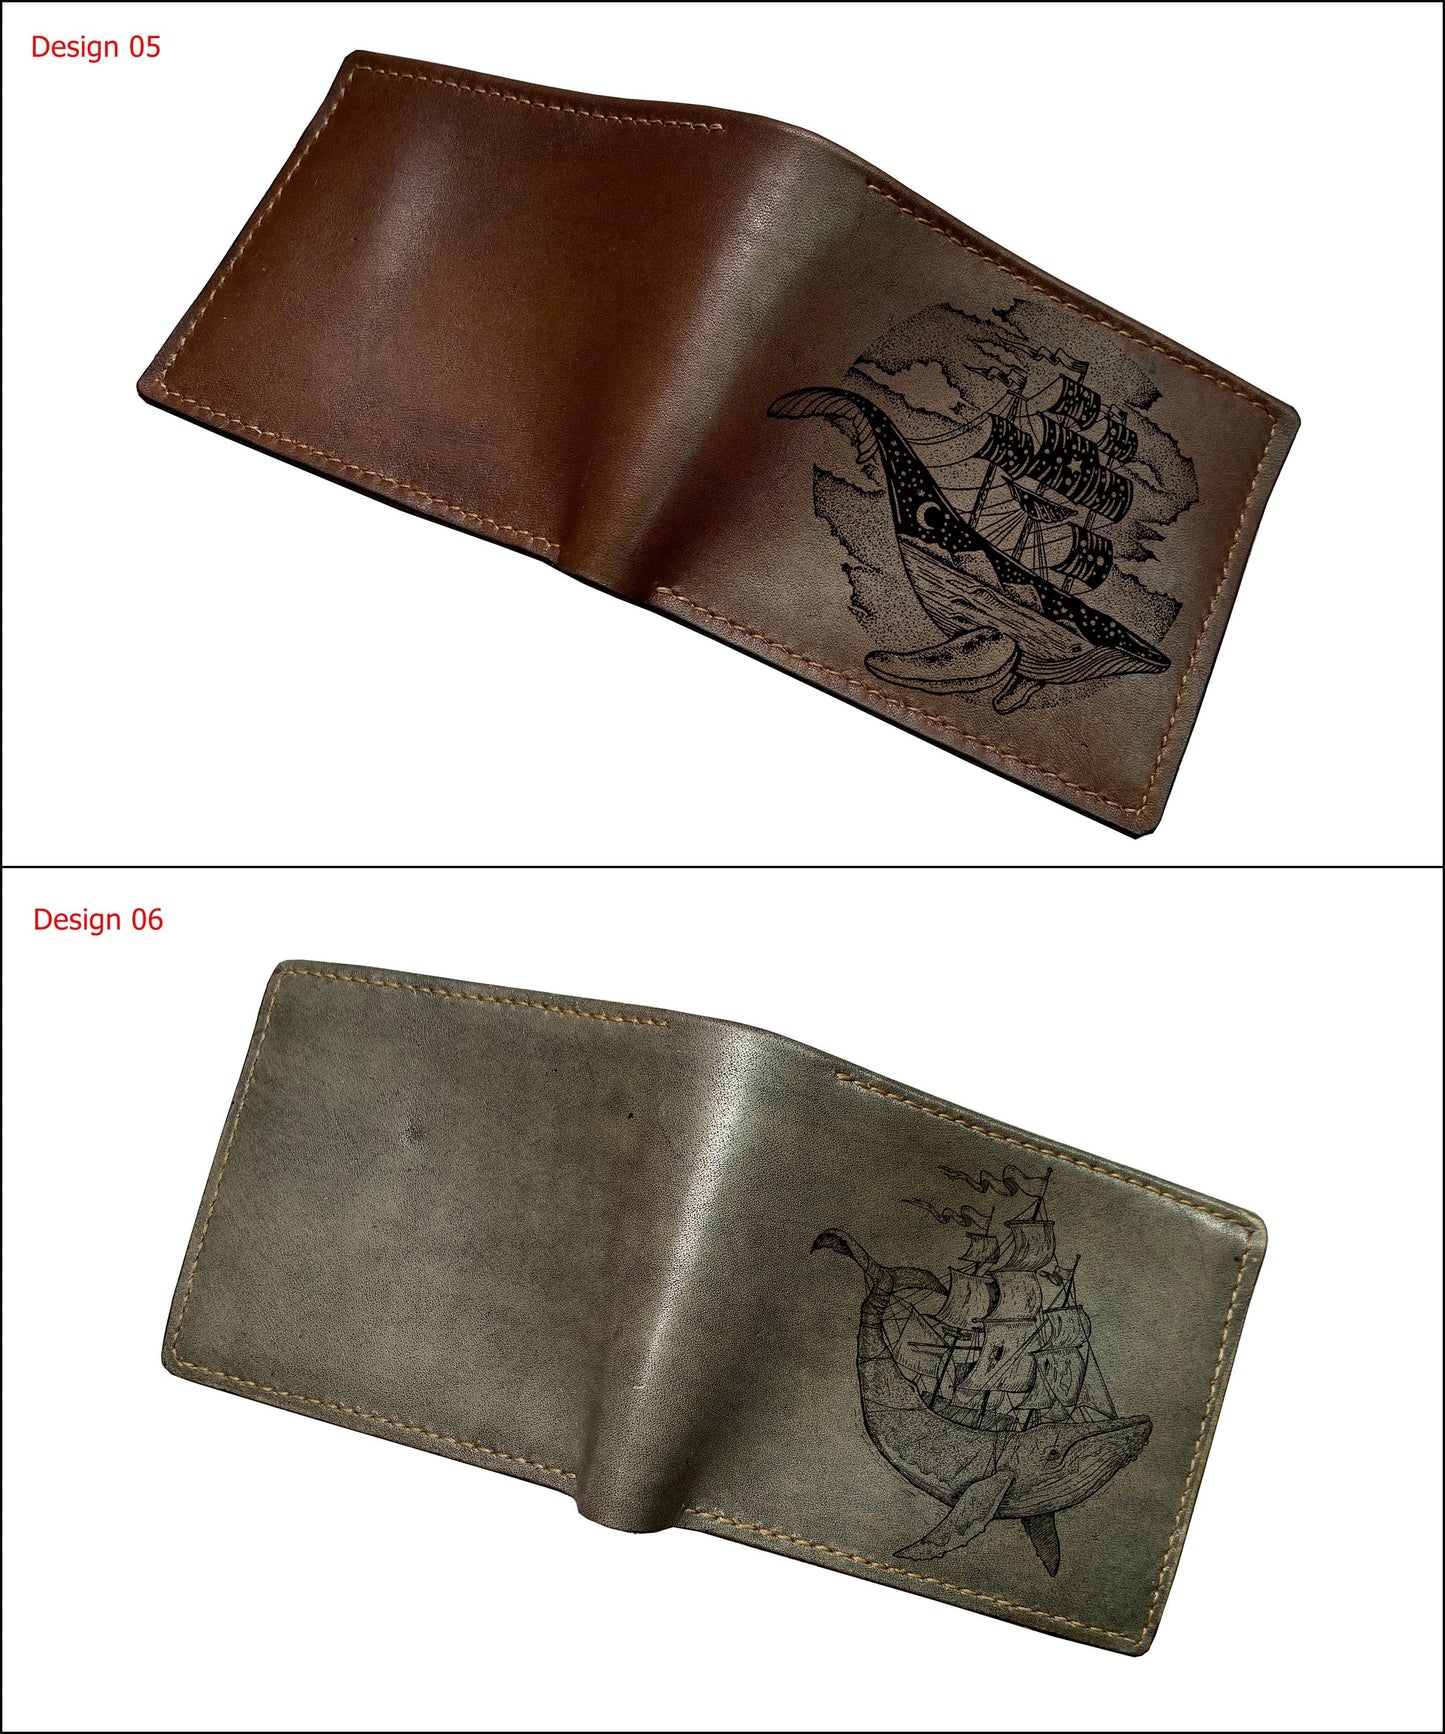 Mayan Corner - Whales genuine leather wallet, ocean sea animal pattern gift, customized leather wallet